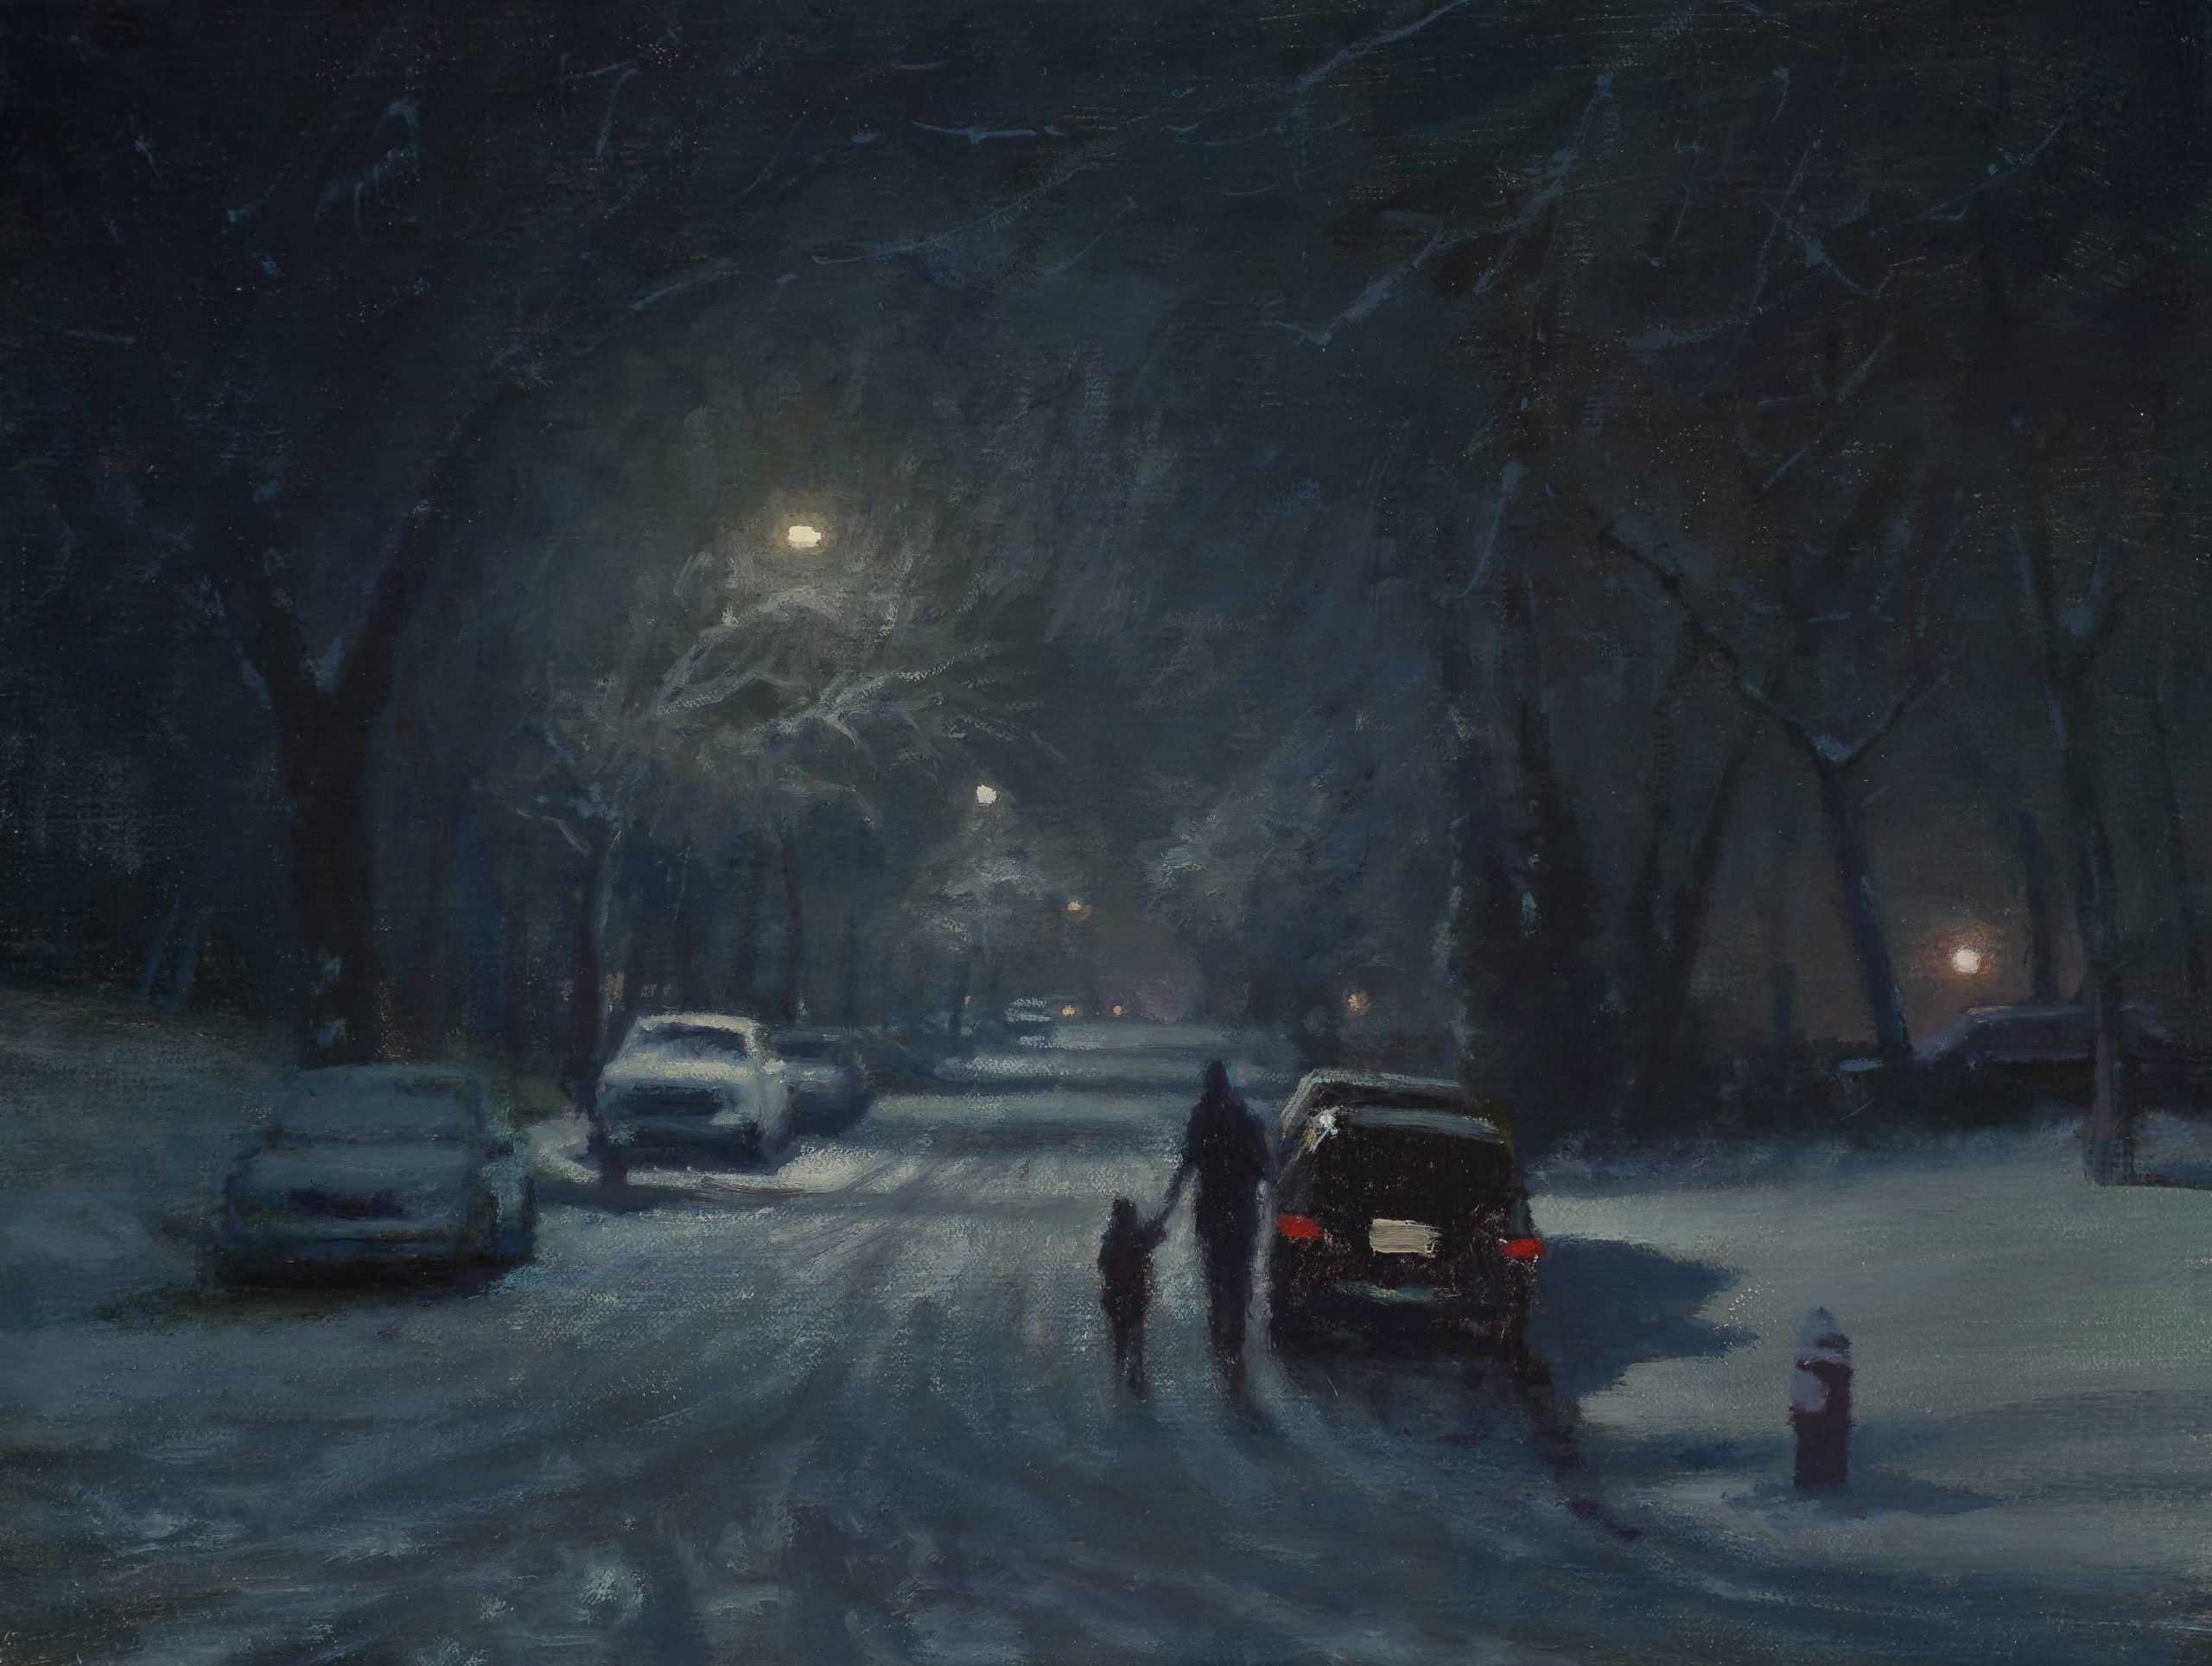 Carl Bretzke, “Recent Snow / Quiet Street,” oil on linen, 12 x 16 in., private collection